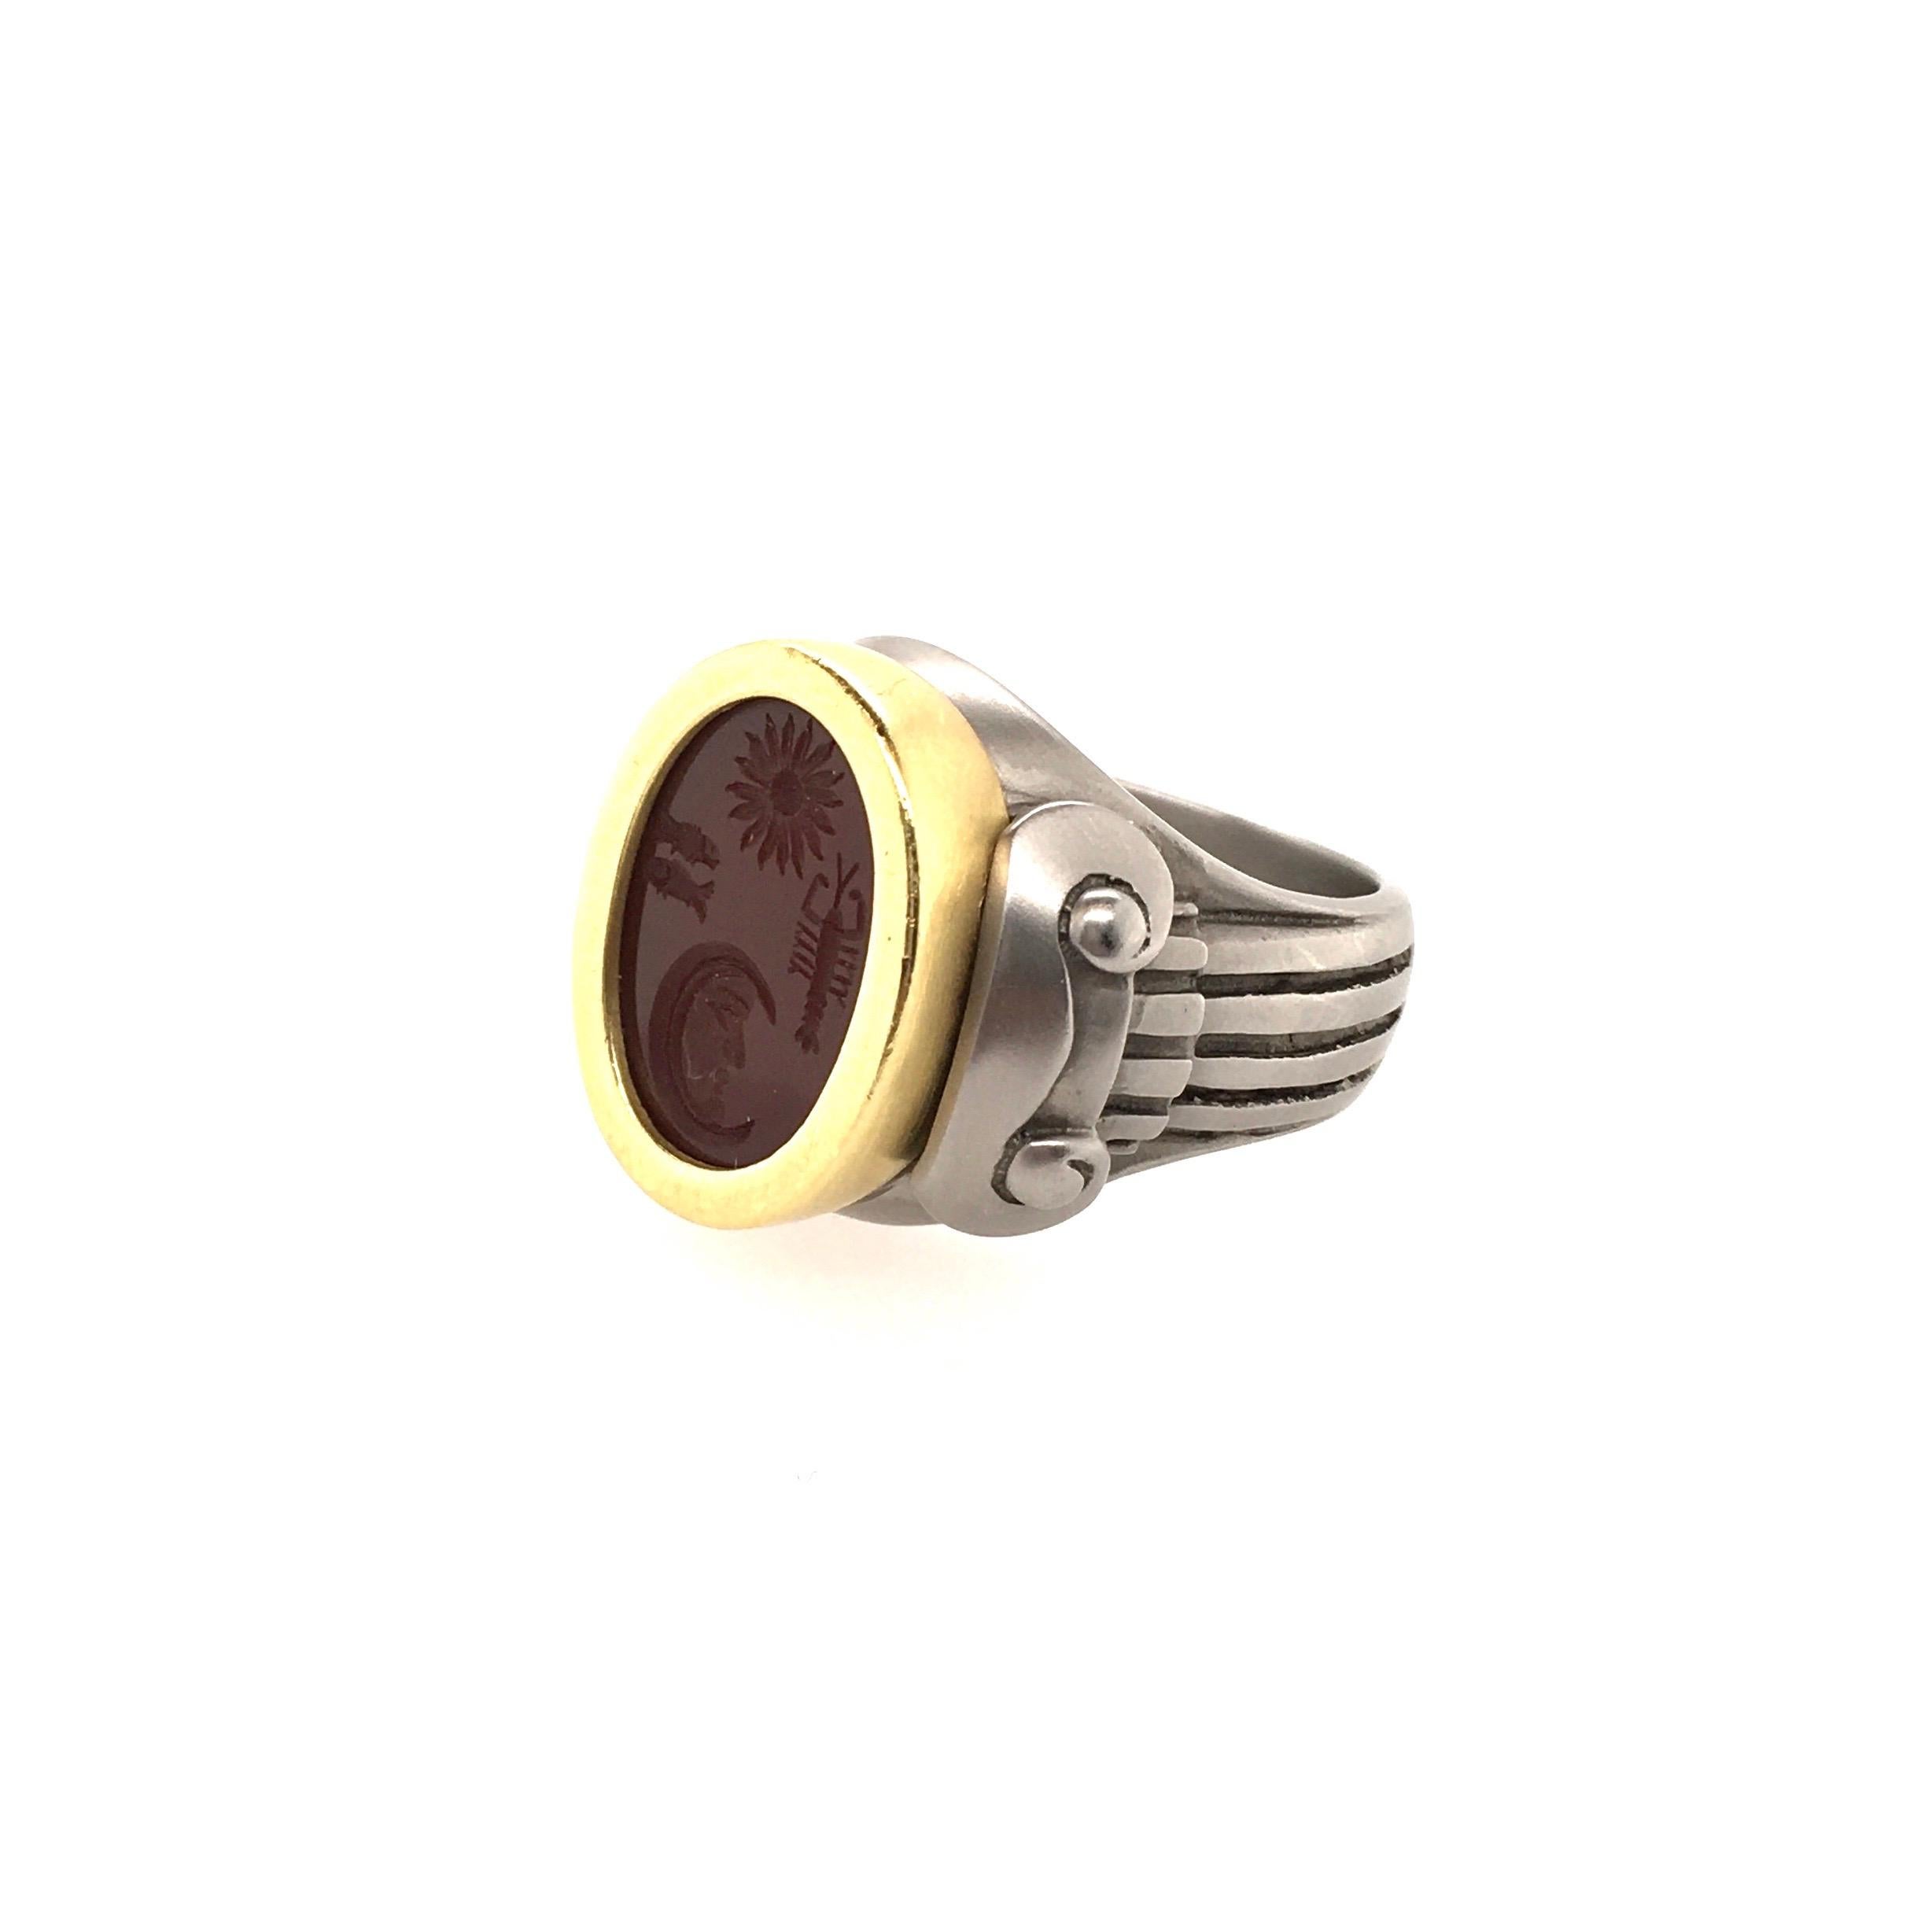 A stainless steel, 18 karat yellow gold and carnelian intaglio ring. Barry Kieselstein Cord. 2000. Designed as a stainless steel ring with column shoulders, centering an oval carnelian intaglio carved with sun, moon, fish and lobster motifs, within